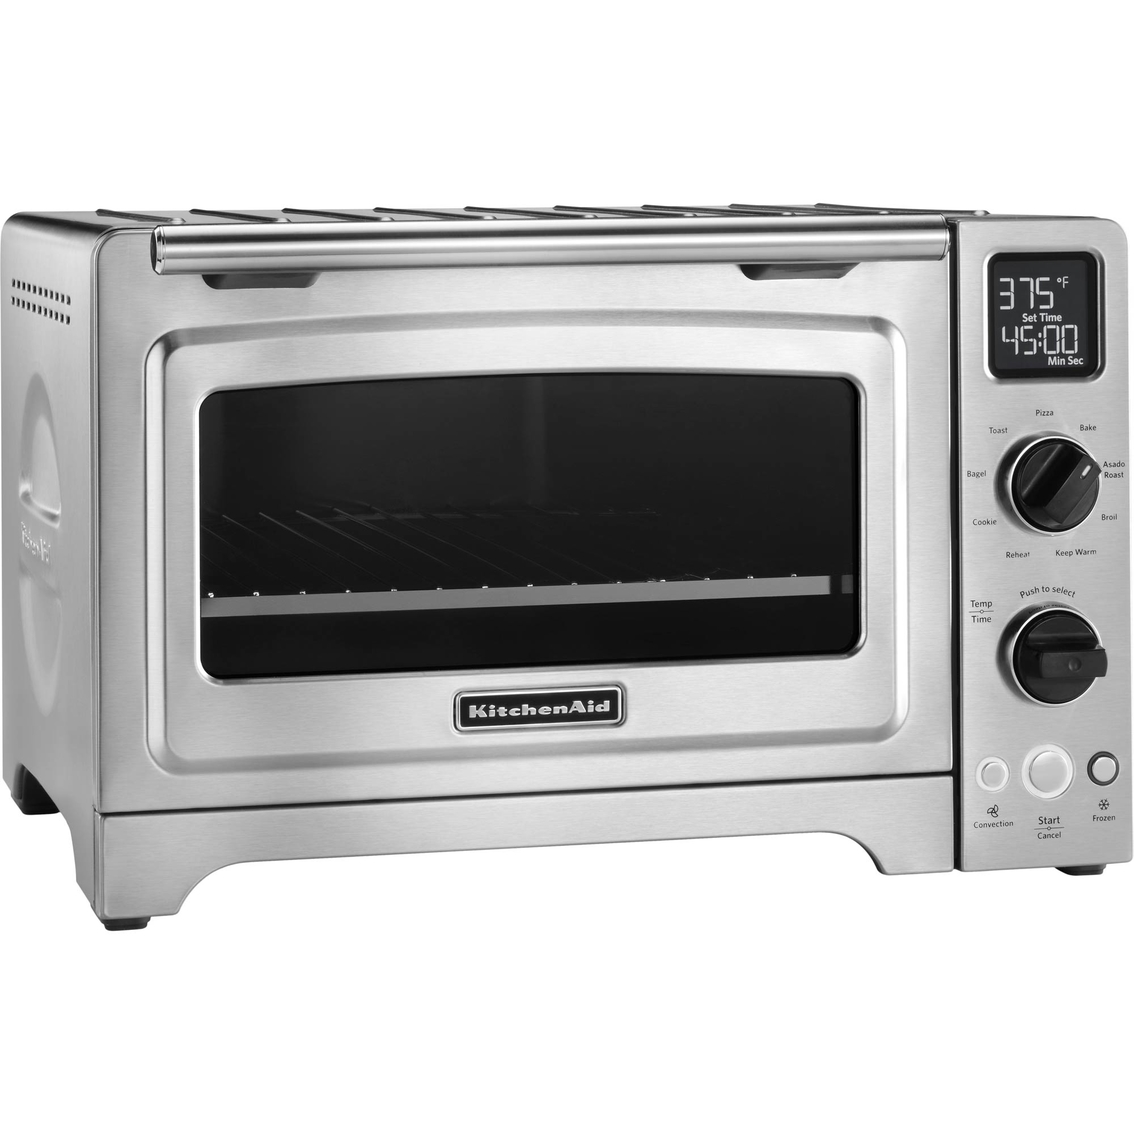 Kitchenaid Stainless Steel 12 In Convection Digital Countertop